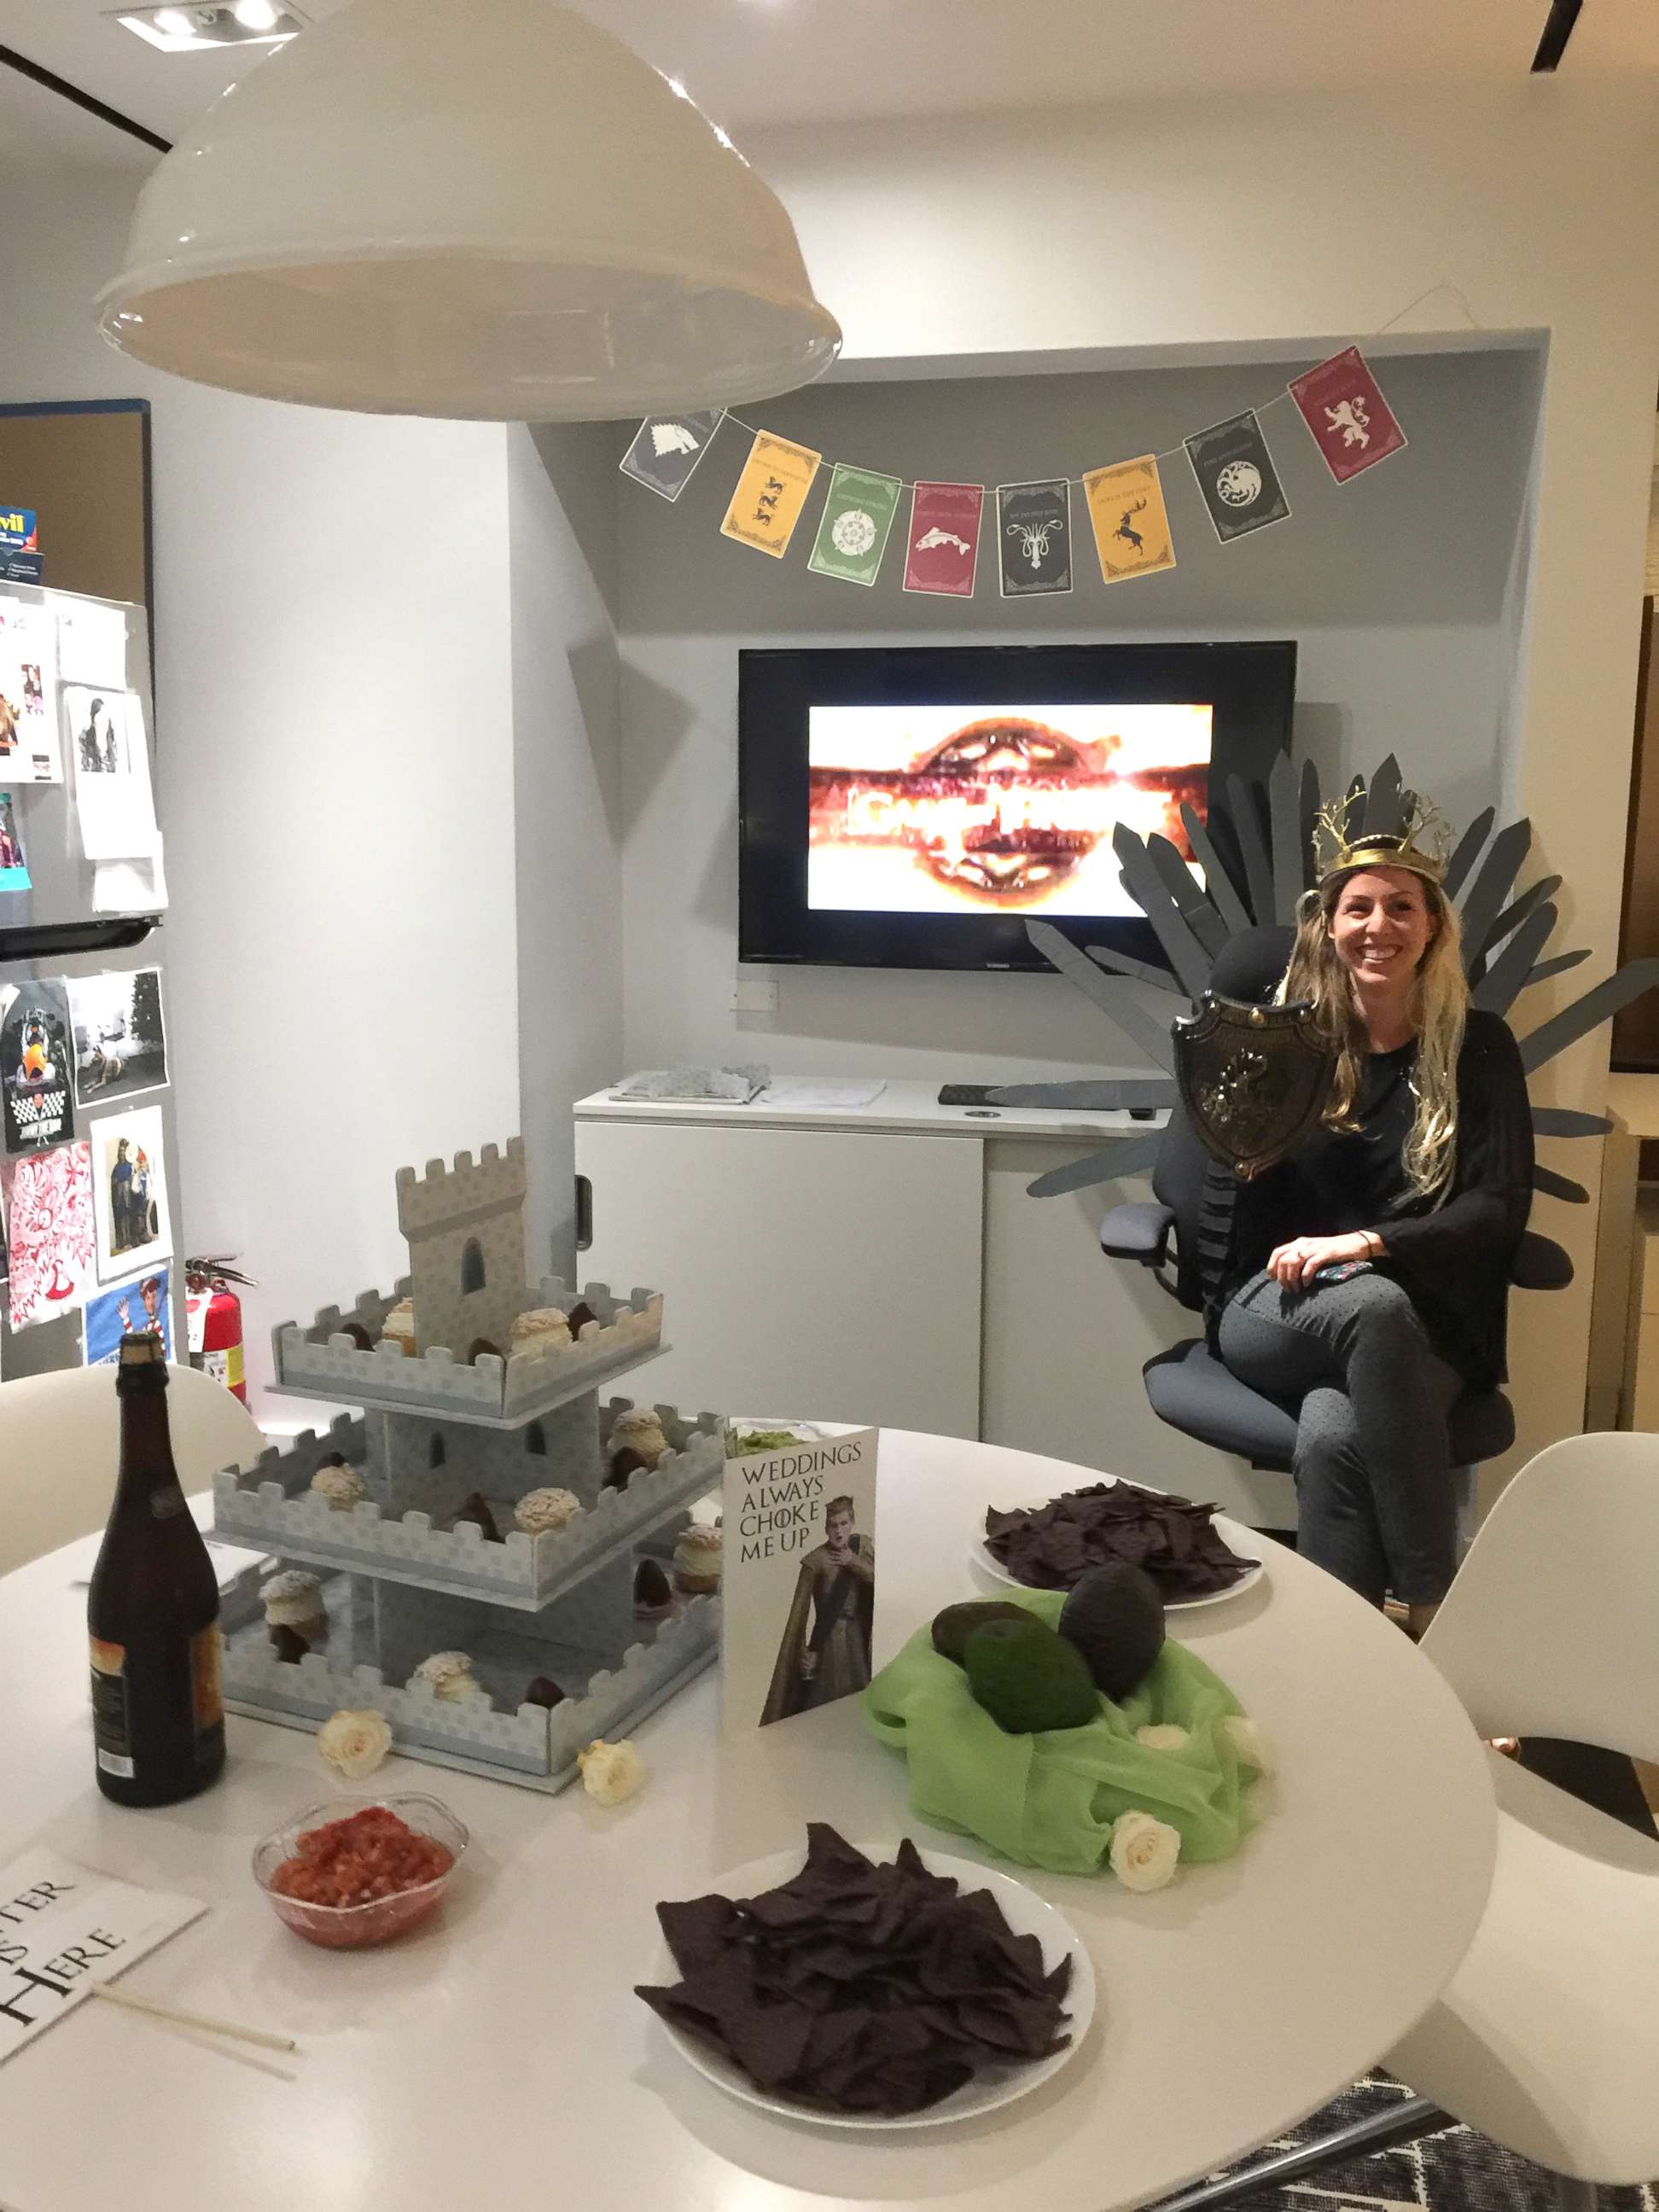 PHOTO: Bride-to-be Caitlin Revuelta was surprised by her colleagues at Humanscale with an elaborate "Game of Thrones"-themed shower on Sept. 27 in New York City.